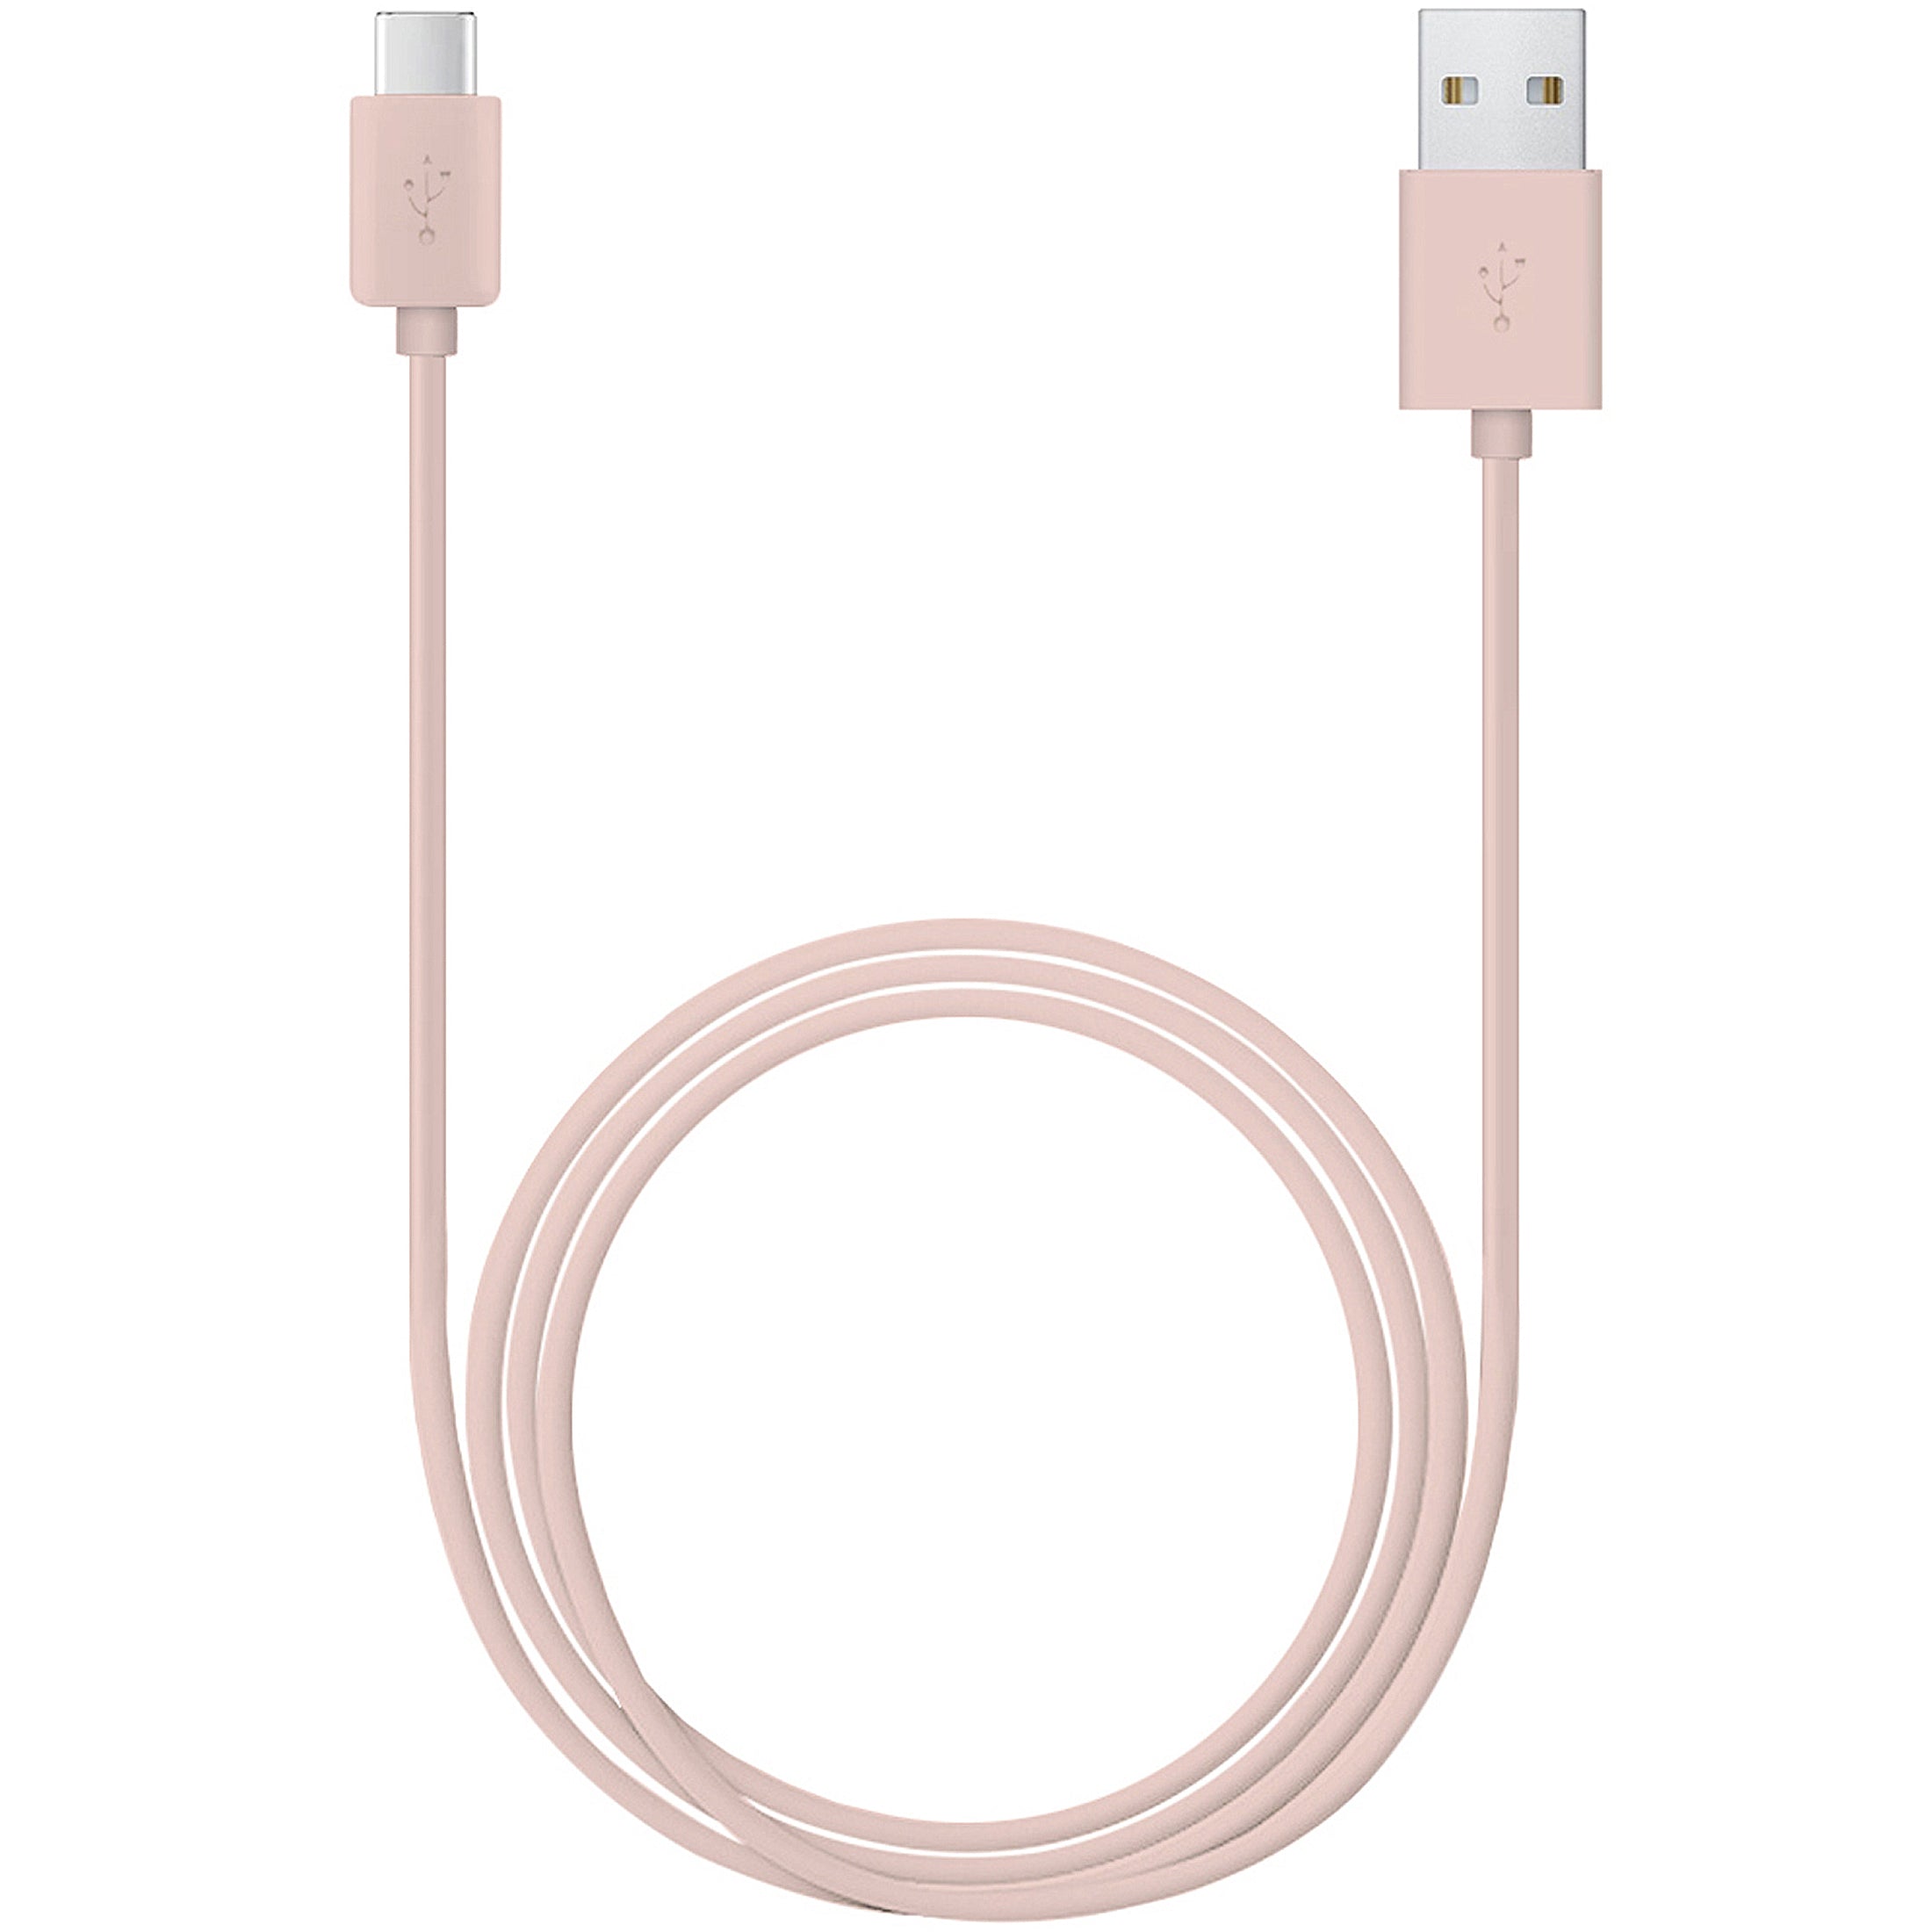 iTouch PlayZoom Charging Cable: Pink, 5ft affordable charger